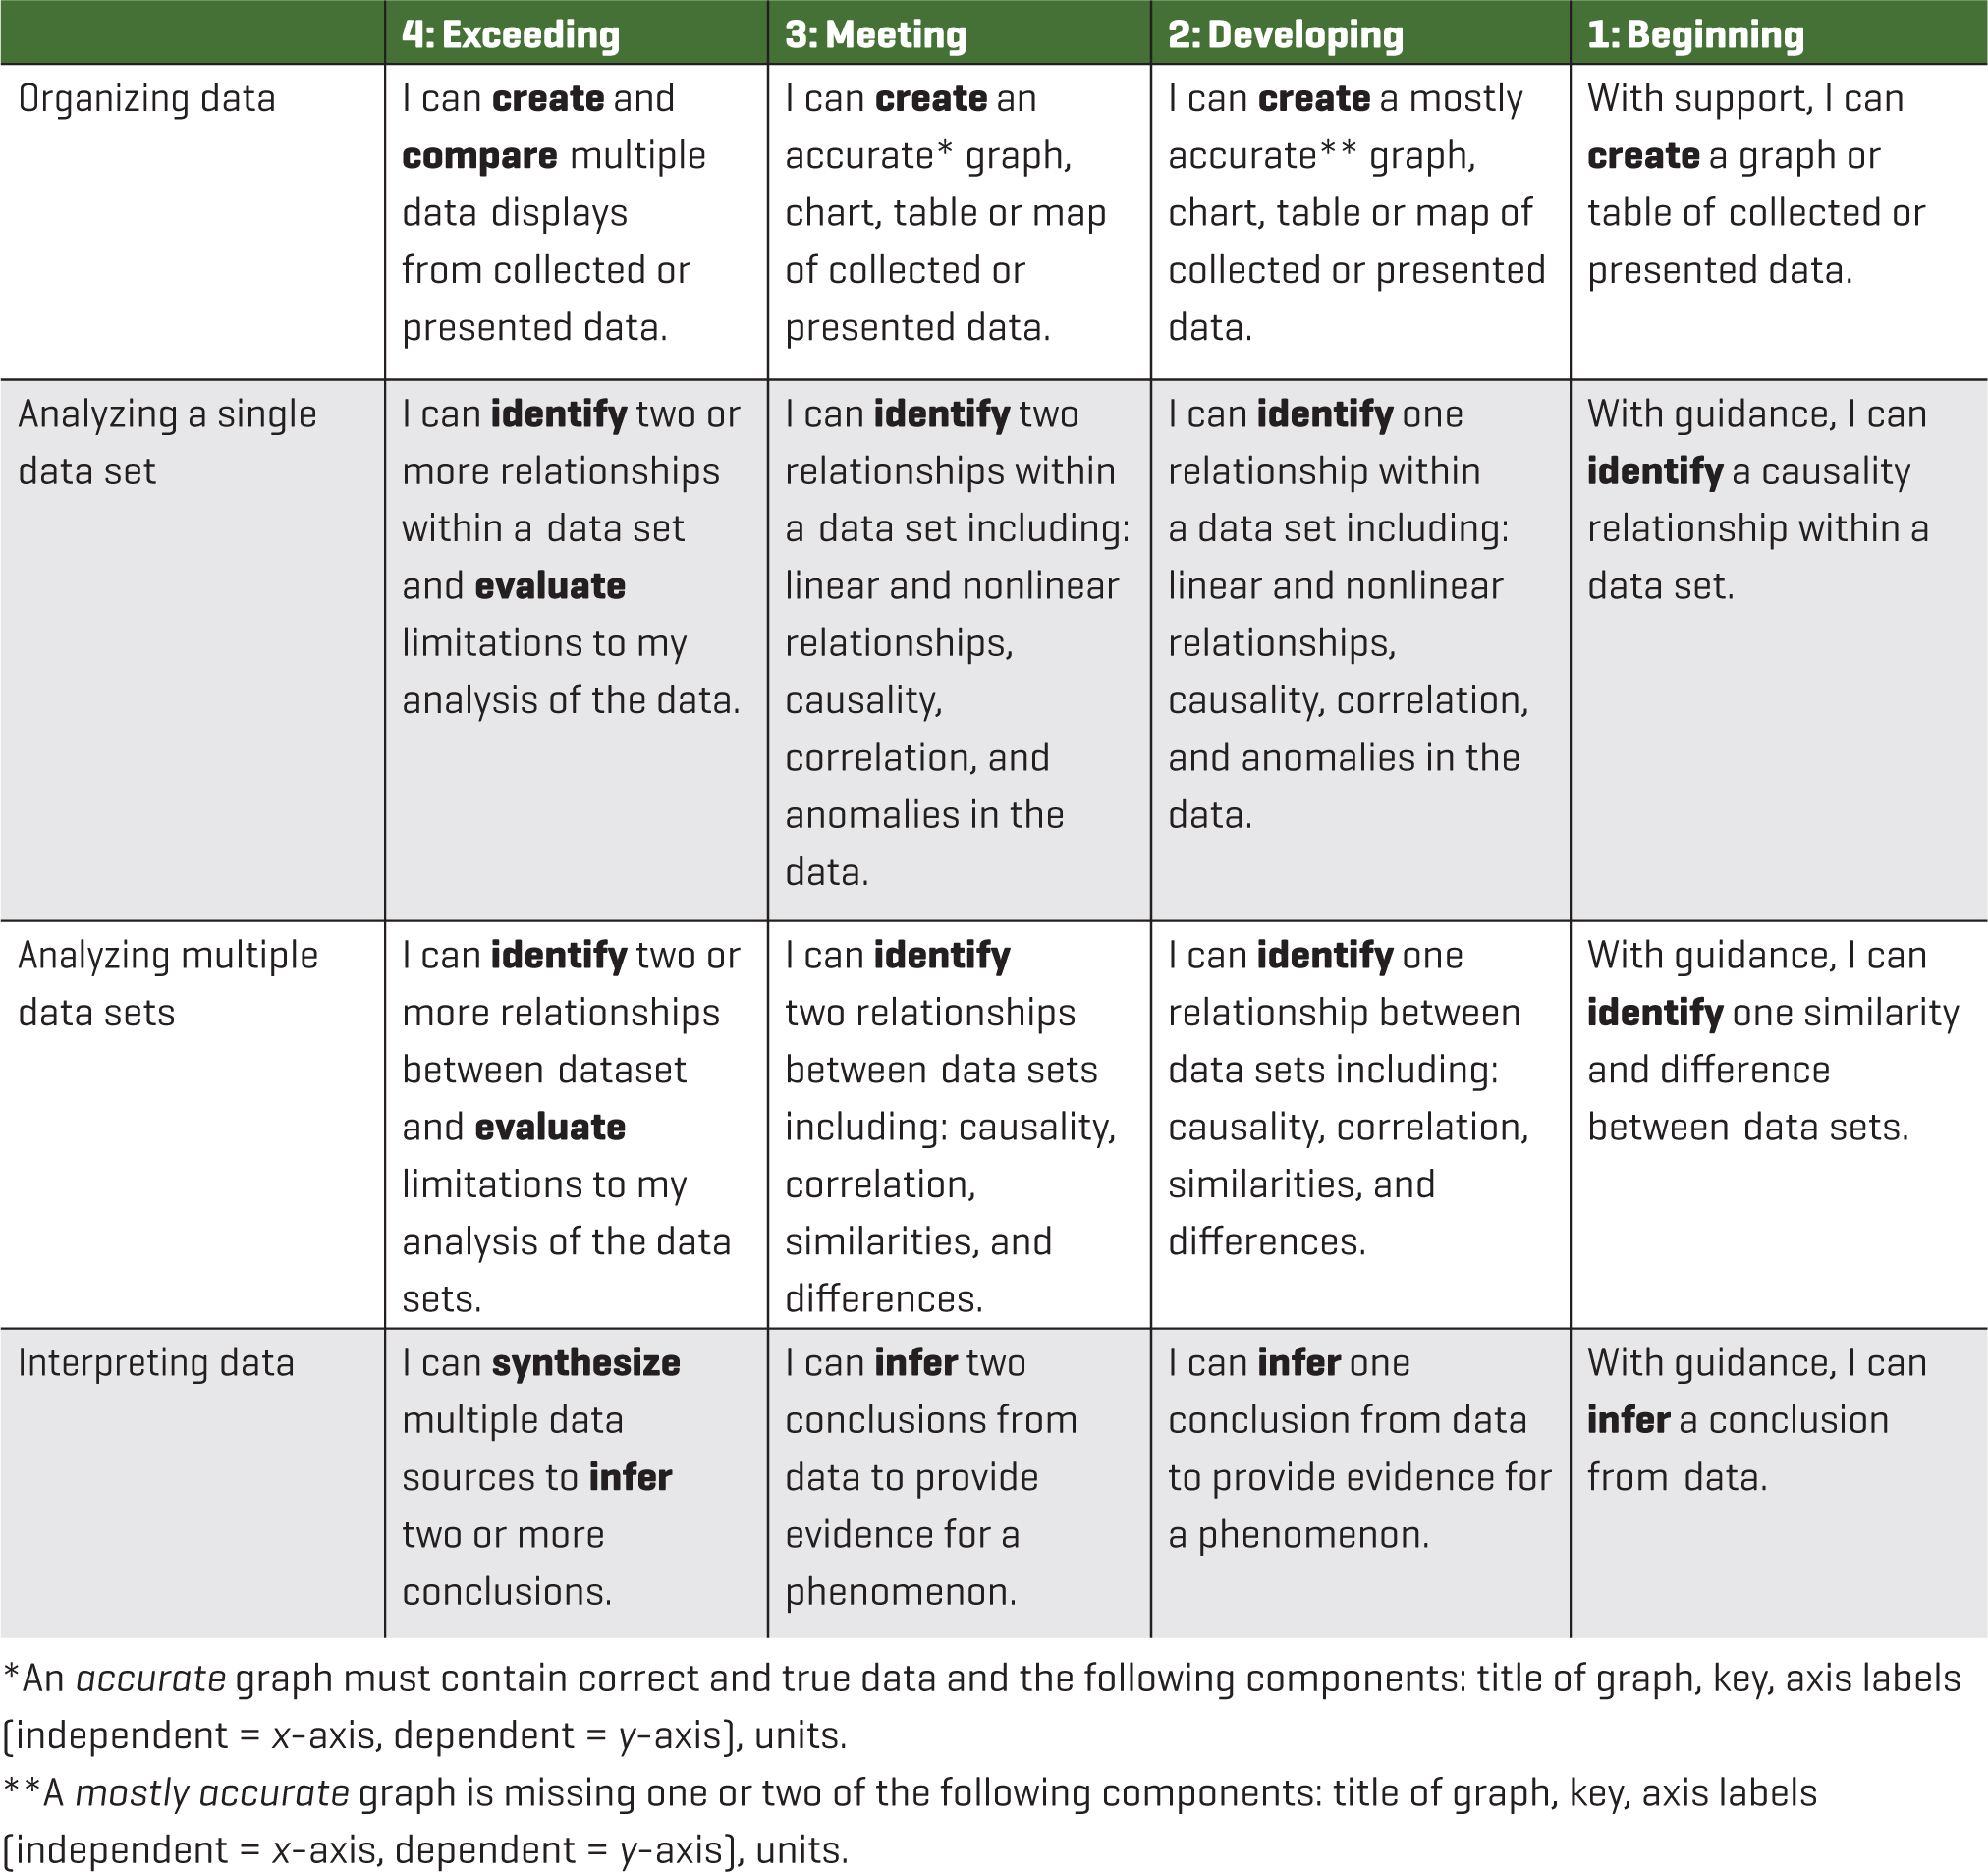 Science and Engineering Practice: Analyzing and Interpreting Data rubric